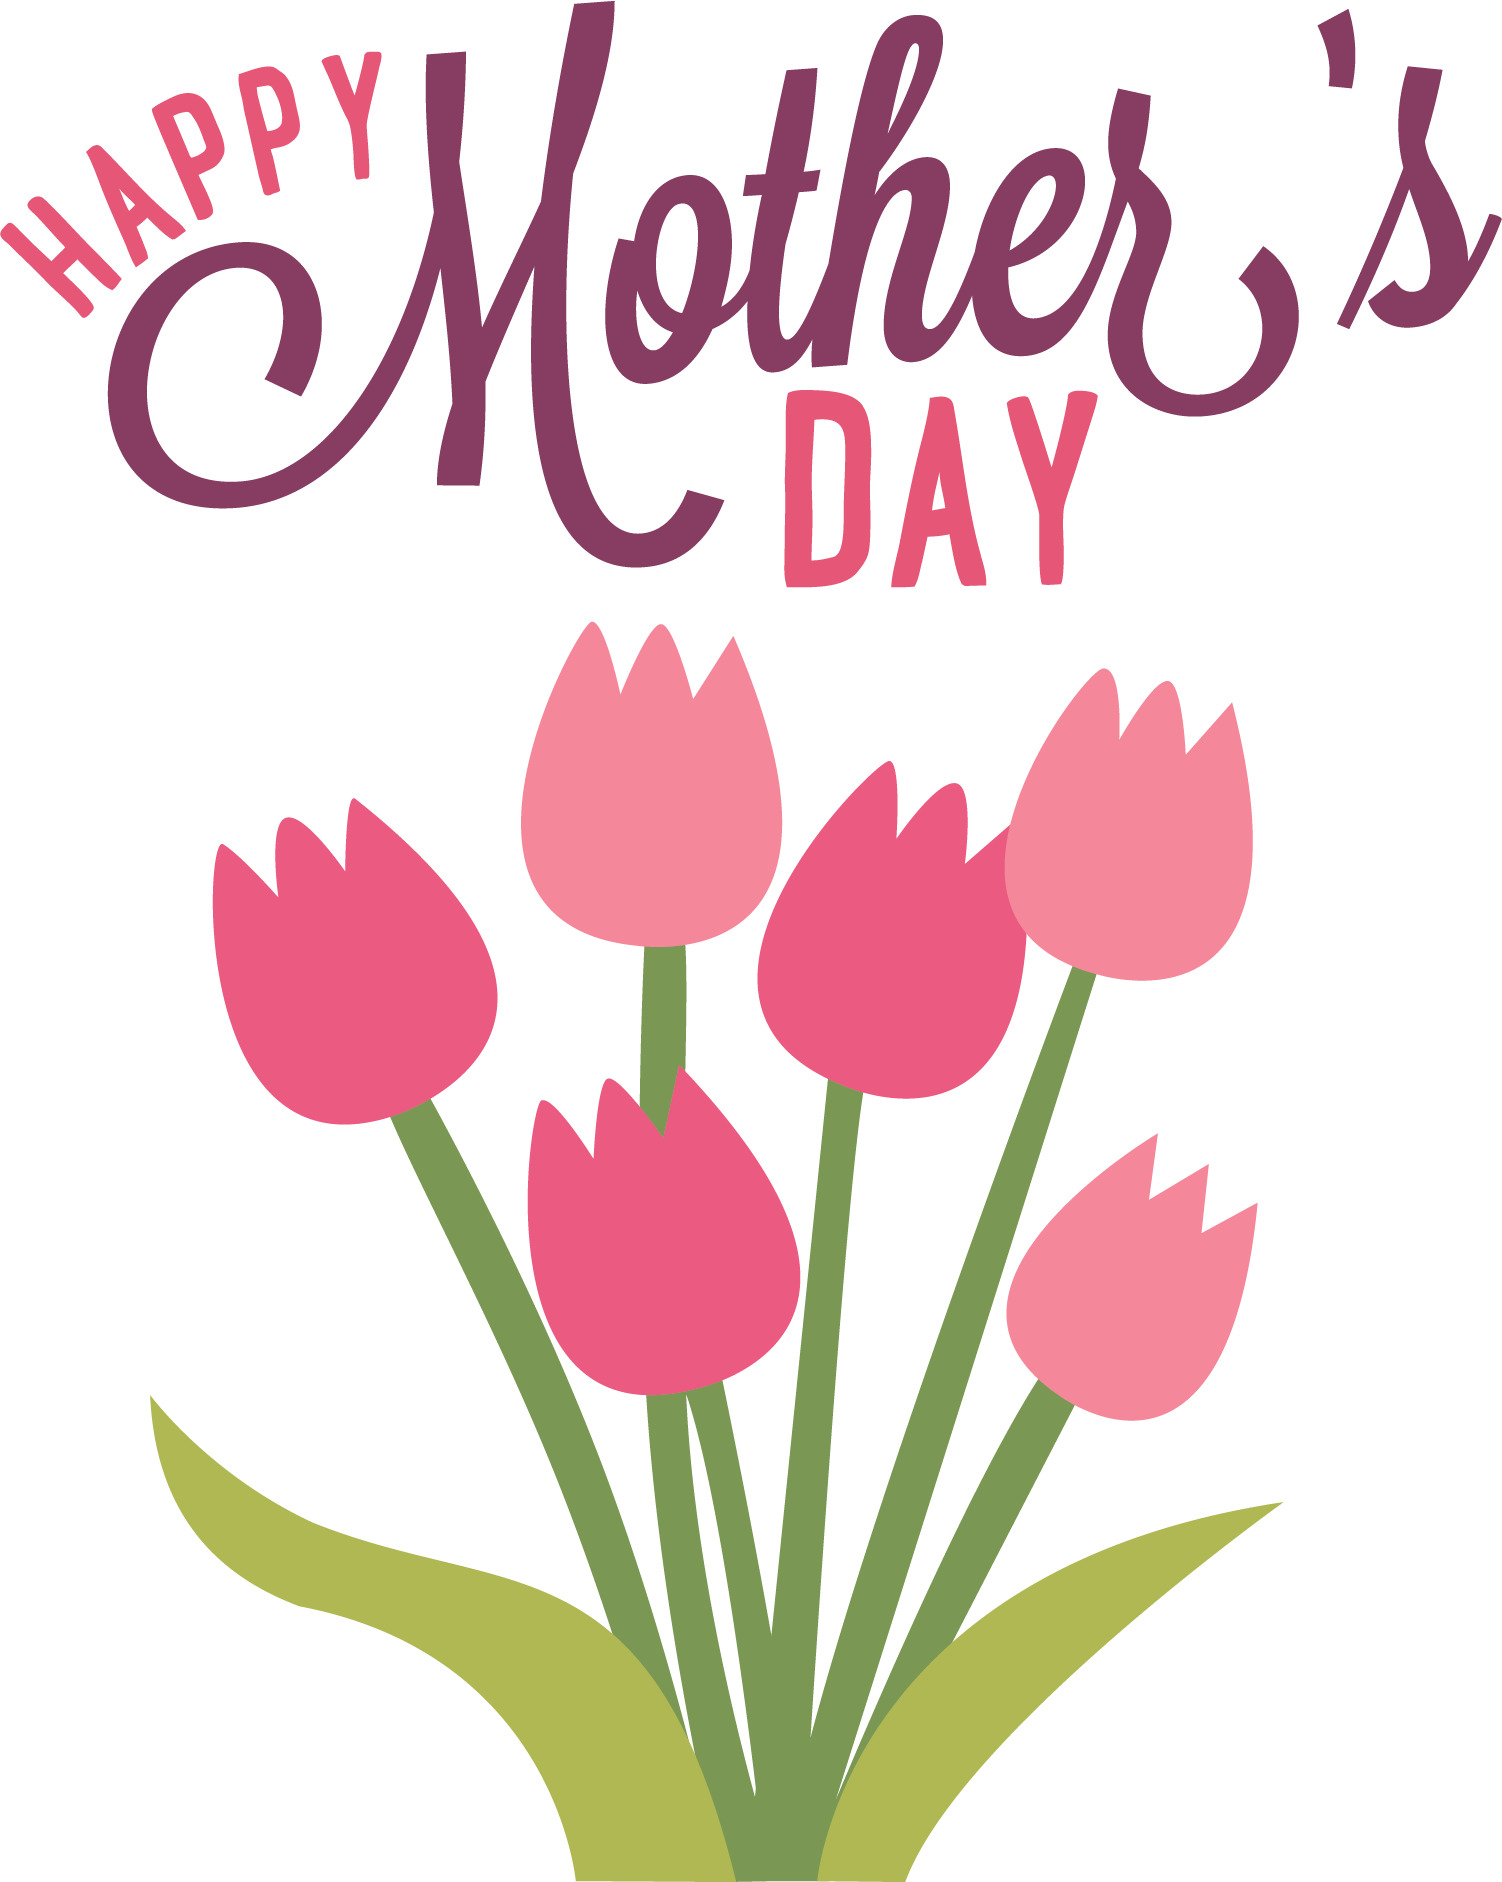 Happy Mothers Day Flowers icons